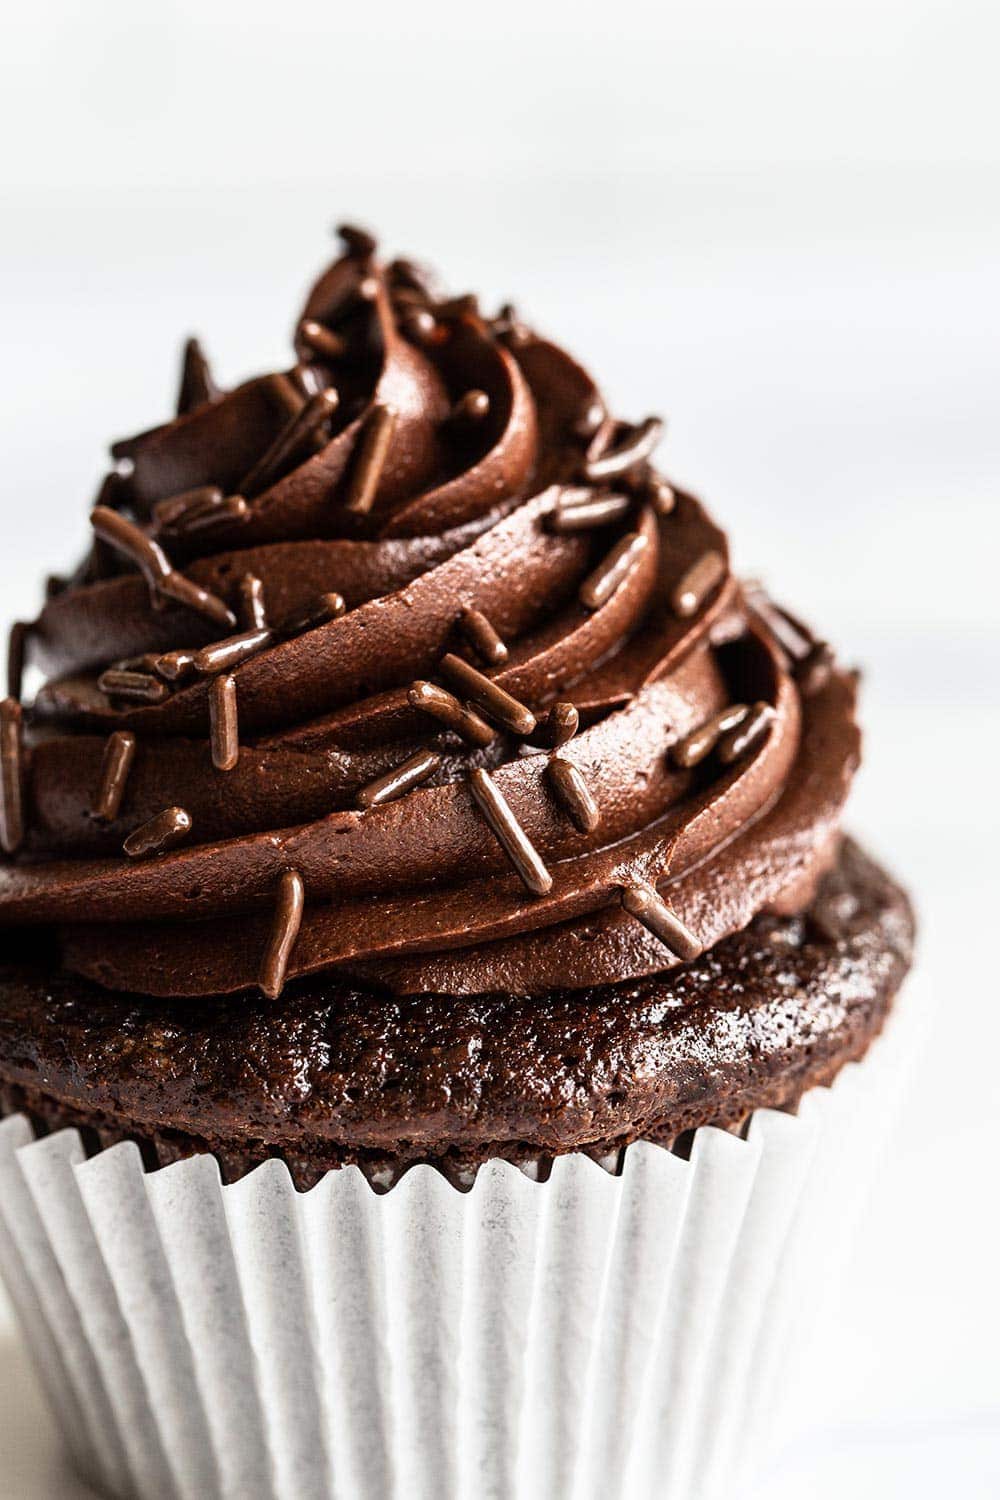 close up of chocolate frosting and chocolate sprinkles on a chocolate cupcake